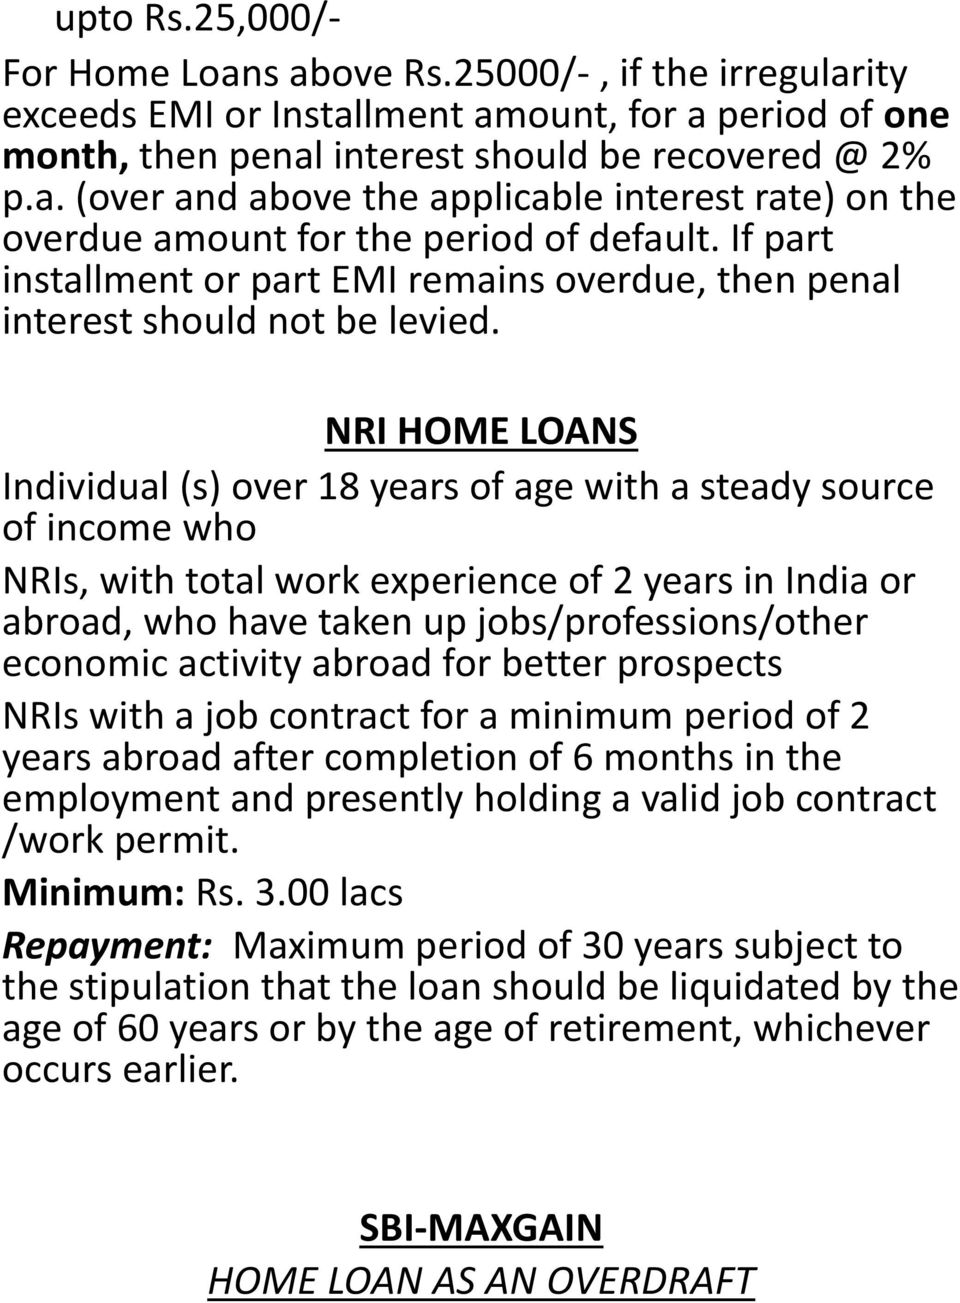 NRI HOME LOANS Individual (s) over 18 years of age with a steady source of income who NRIs, with total work experience of 2 years in India or abroad, who have taken up jobs/professions/other economic